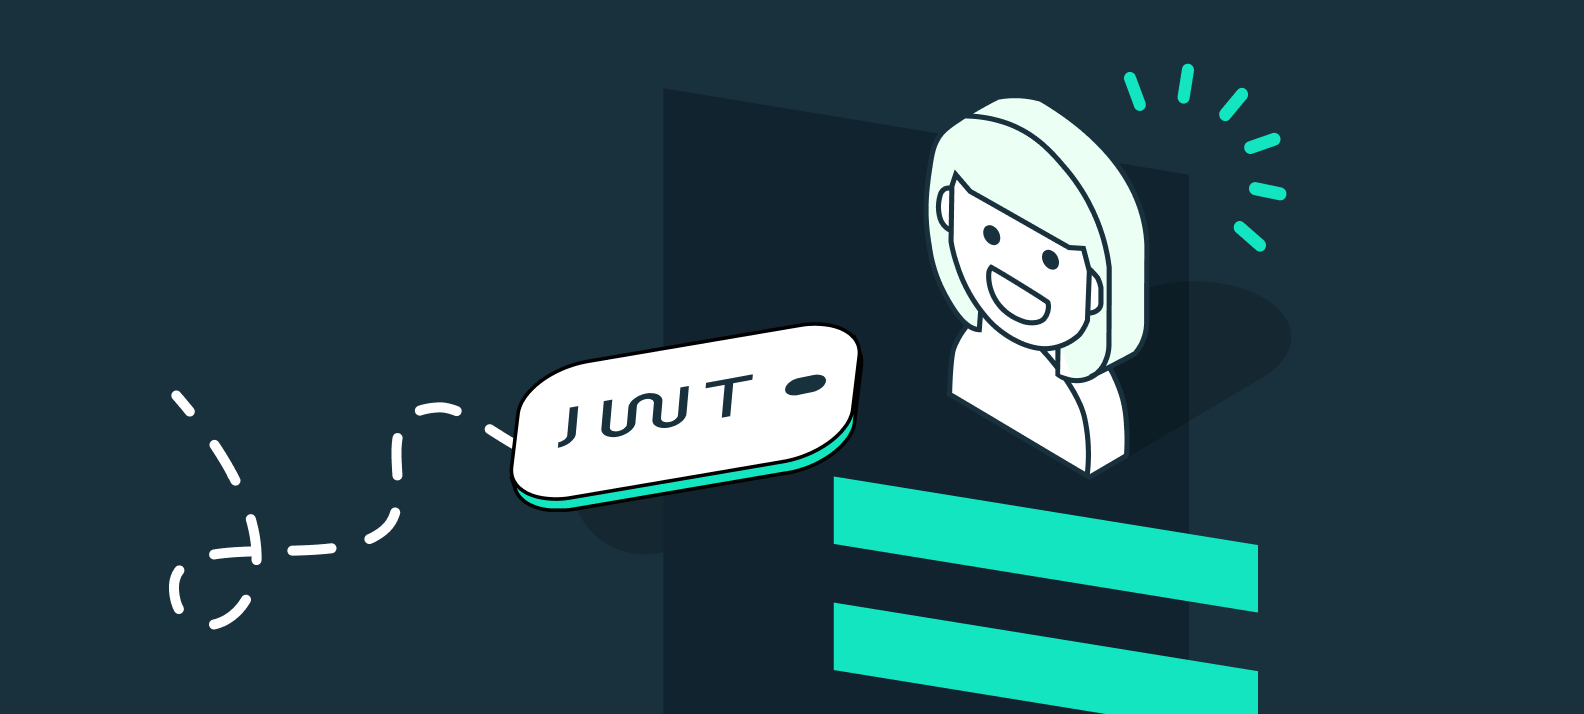 A JWT flies around the left side of the image while a girl on the right smiles at it, conveying a positive user experience.